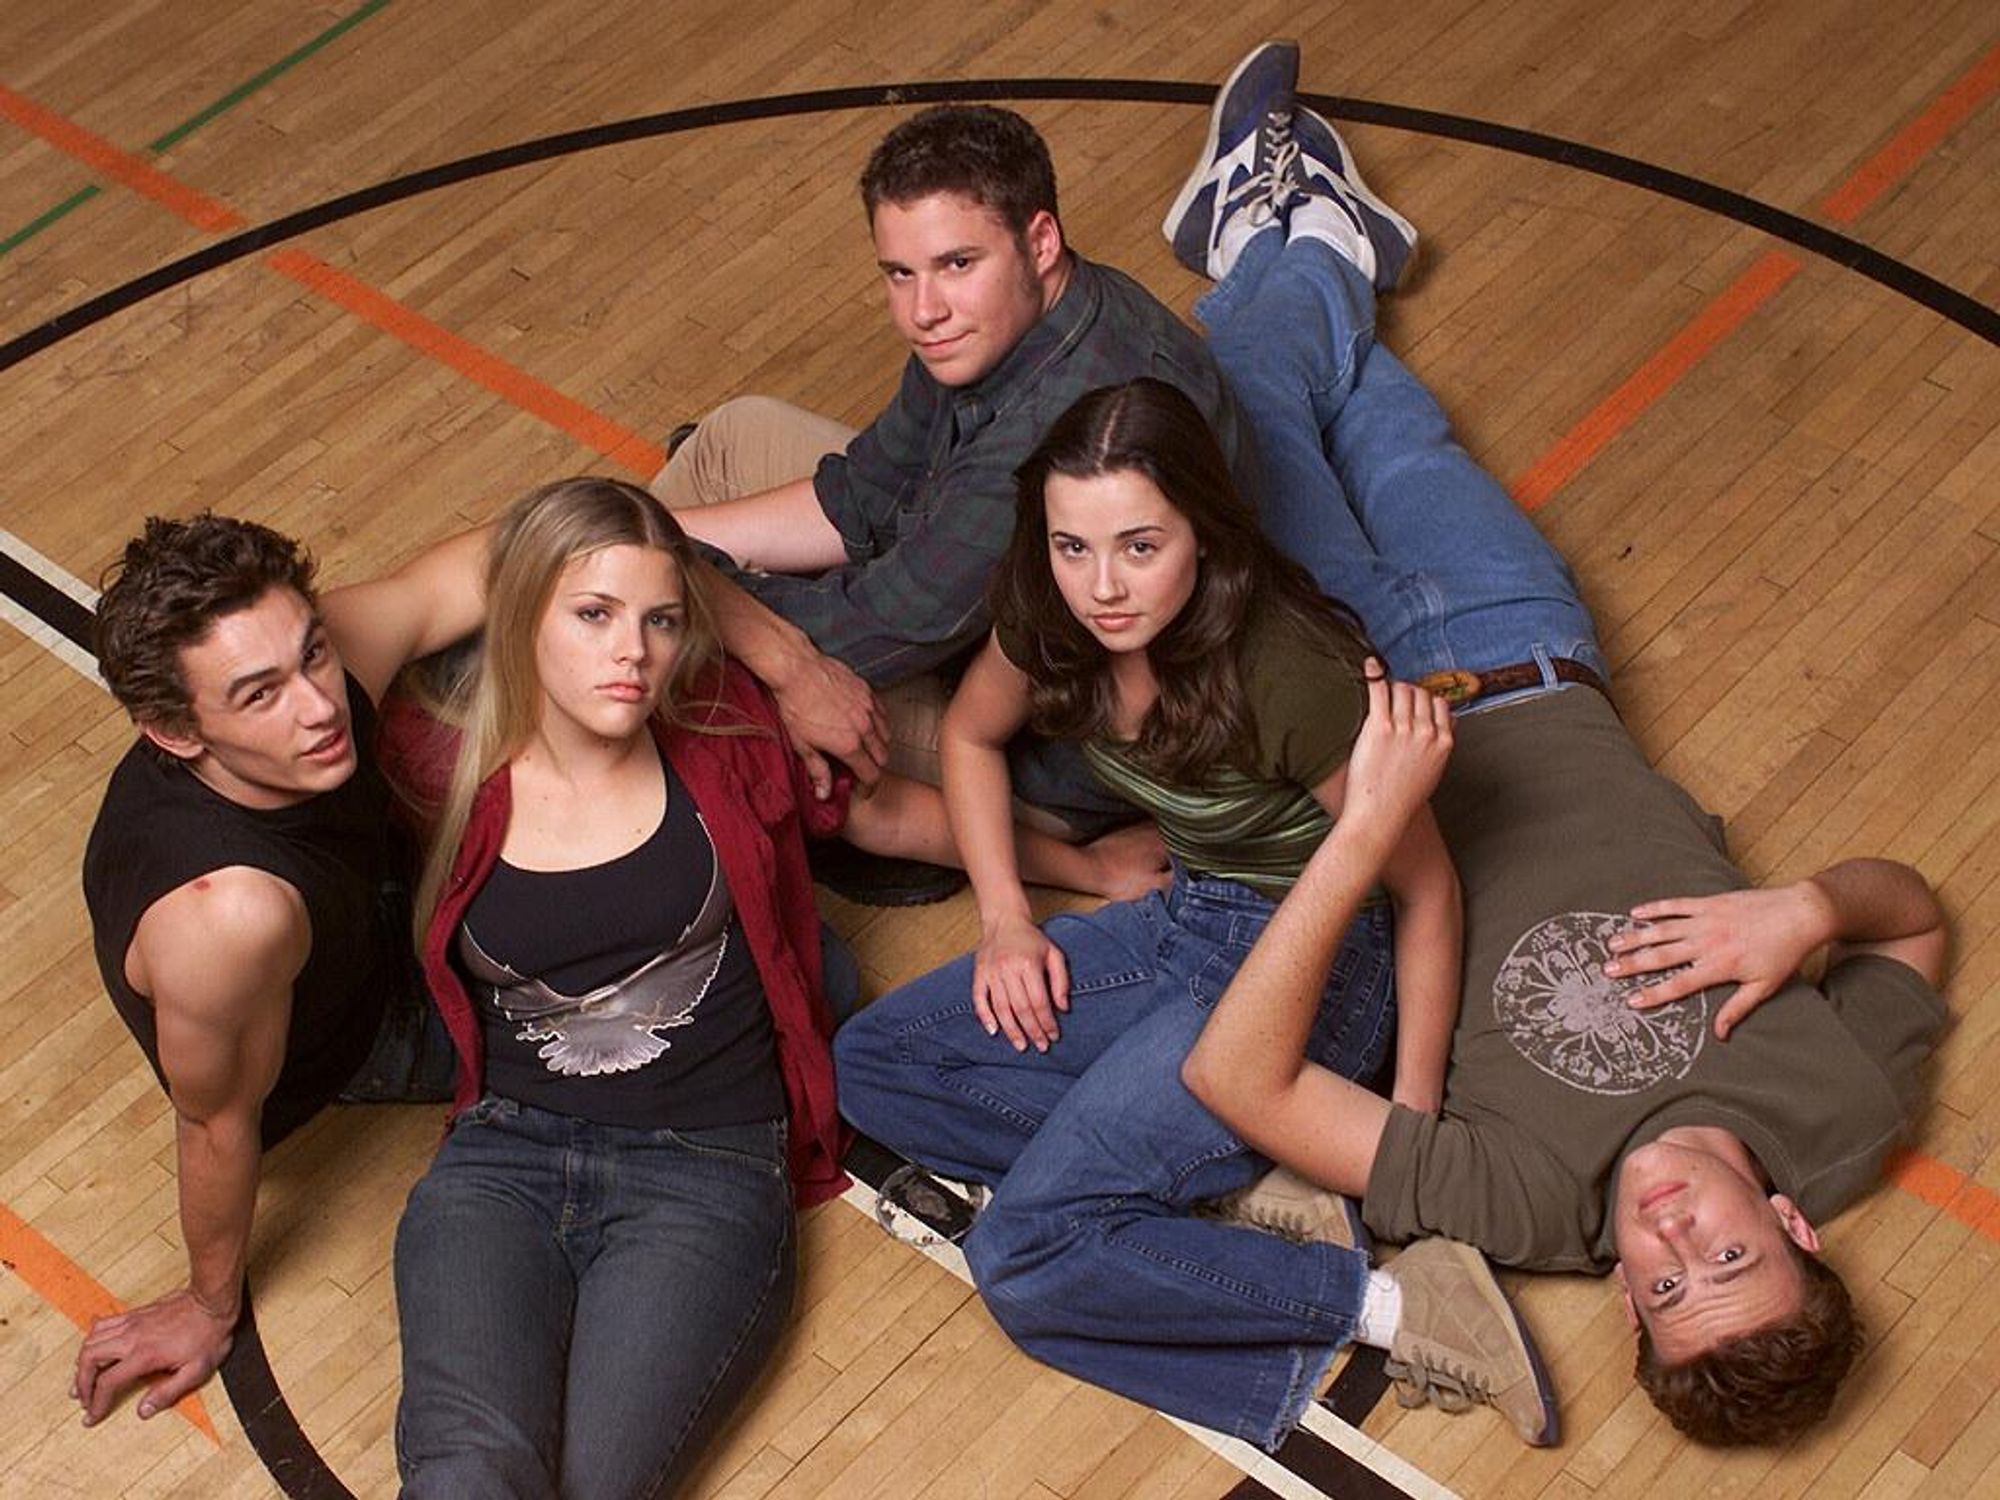 James Franco, Busy Phillips, Seth Rogan, Linda Cardellini, and Jason Segal sit on a gym floor staring up the camera.